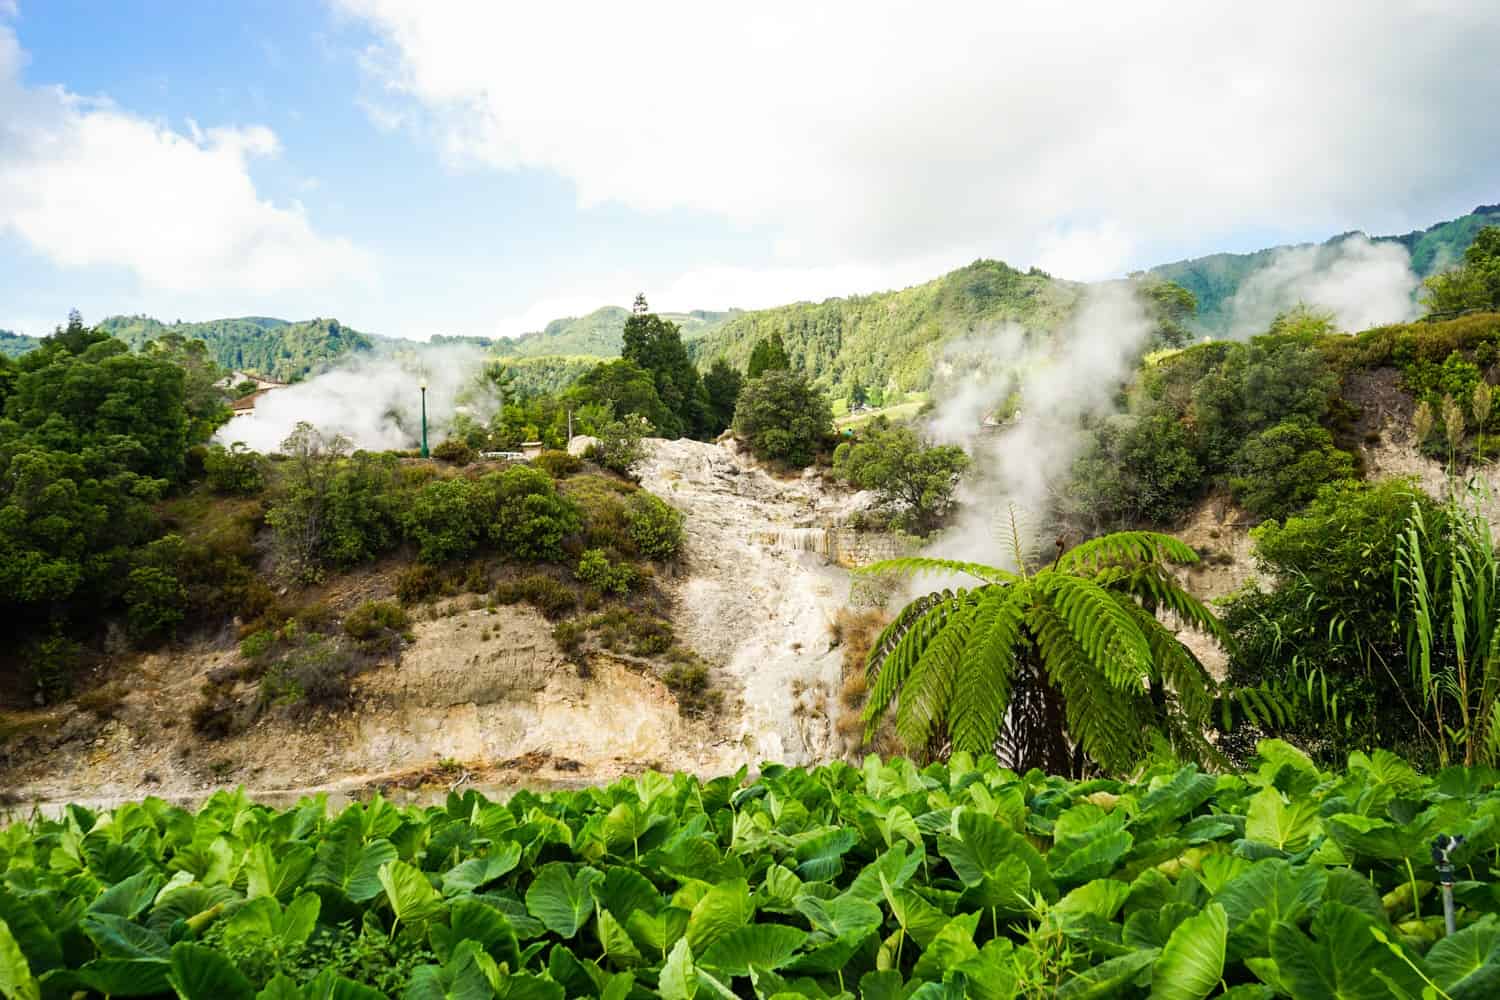 Geothermal activity in the Azores